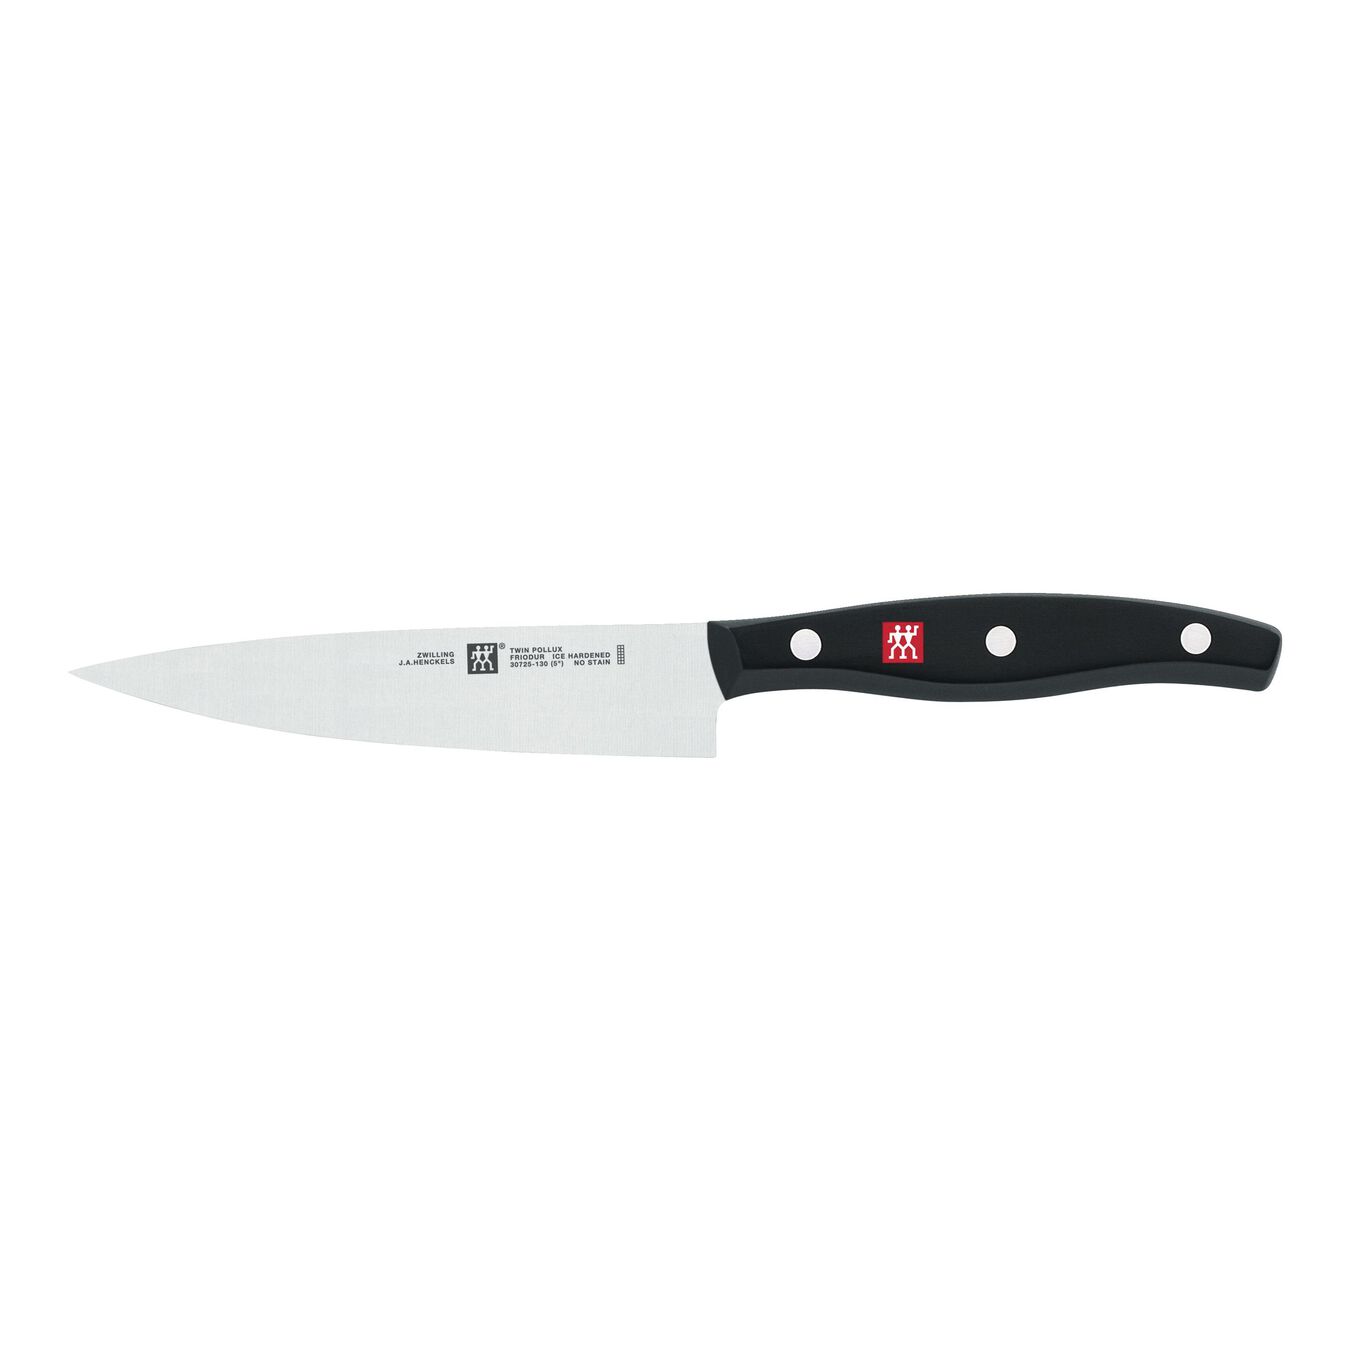 13 cm Chef's knife compact,,large 1